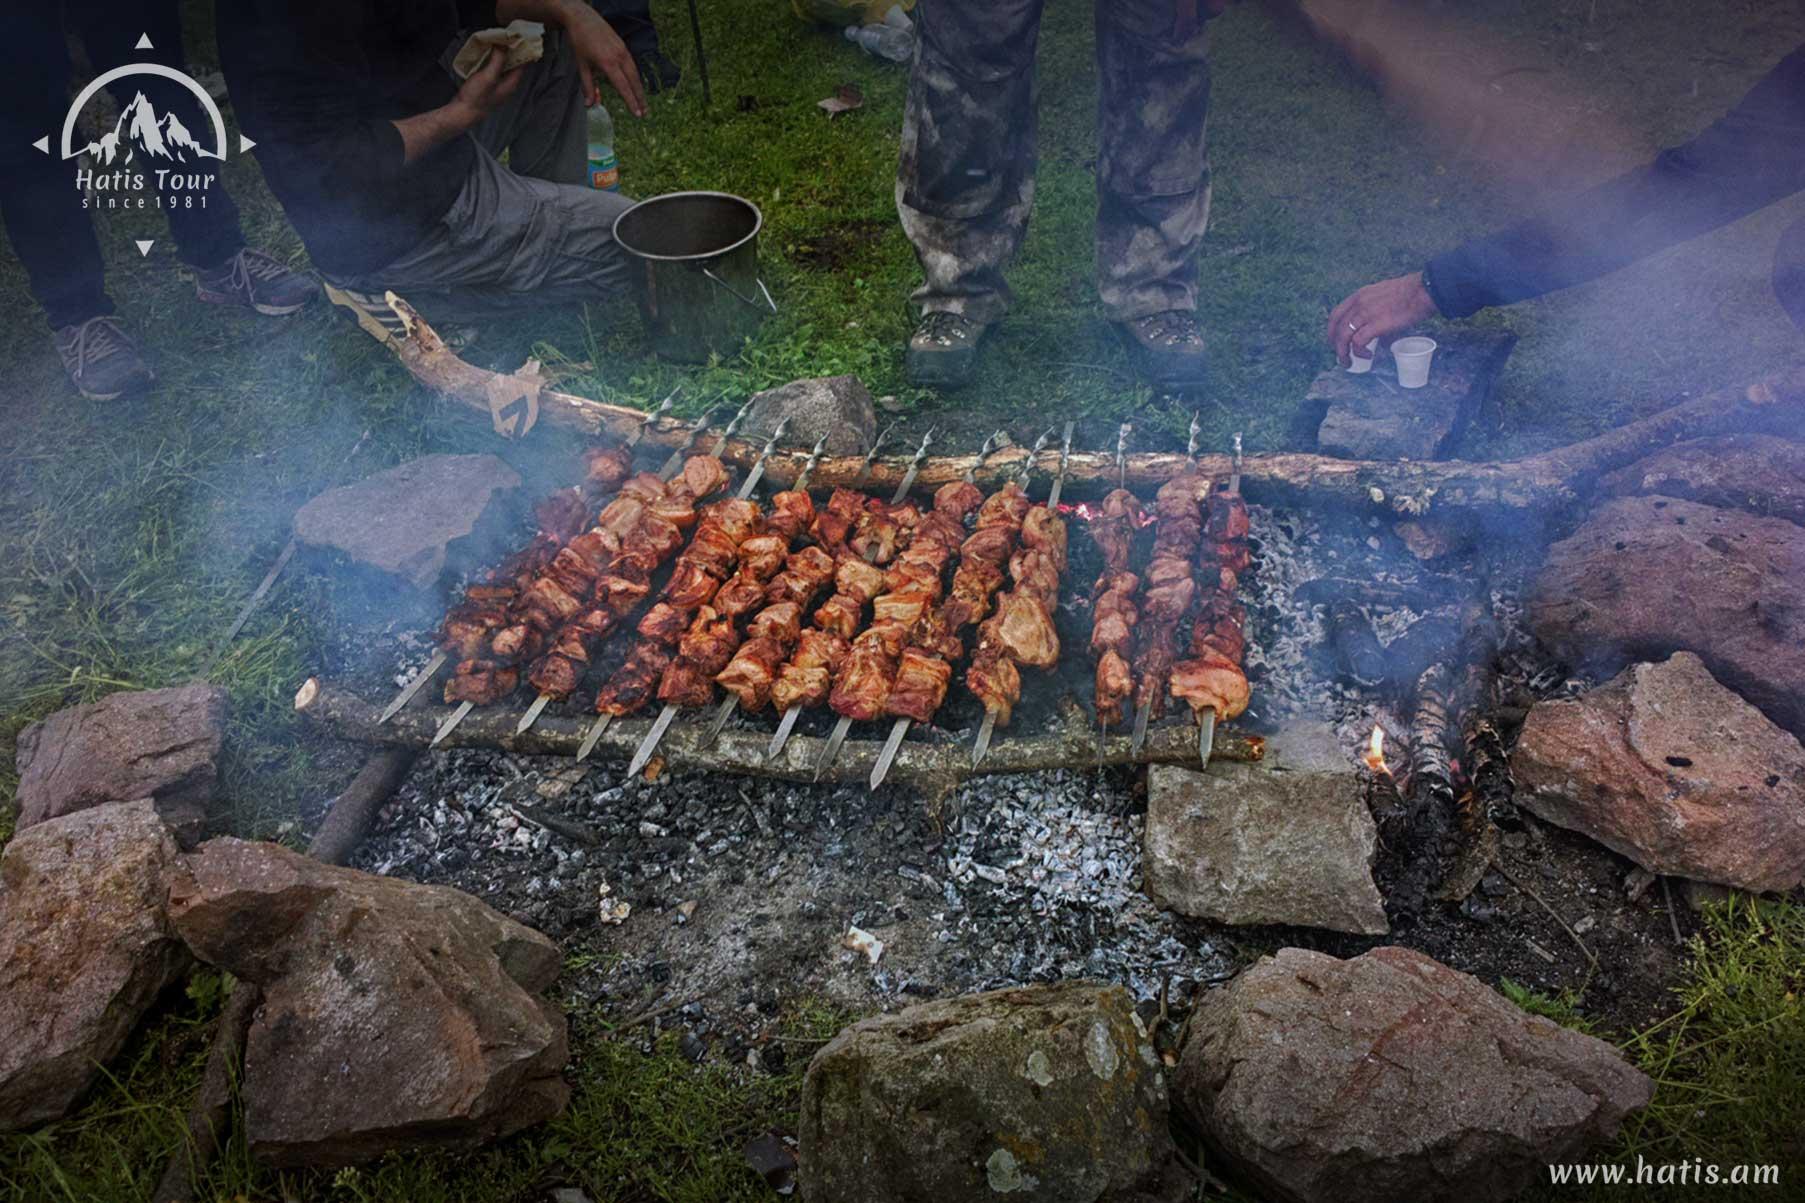 Barbecue on the slope of Mount Khustup